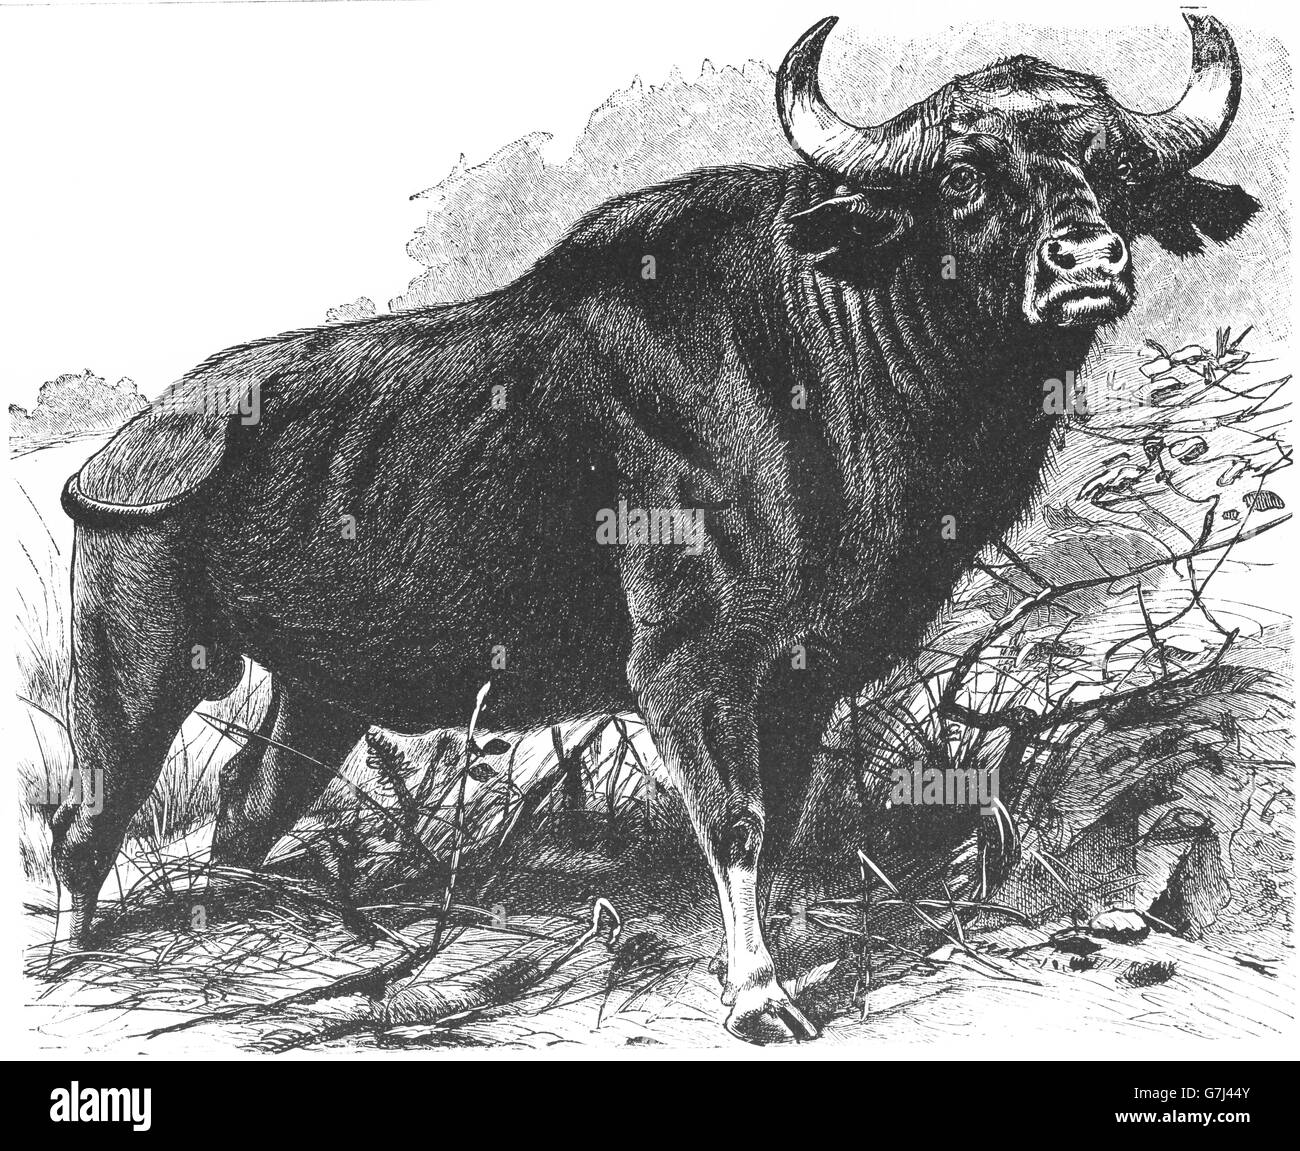 Gaur, Bos gaurus, Indian bison, illustration from book dated 1904 Stock Photo